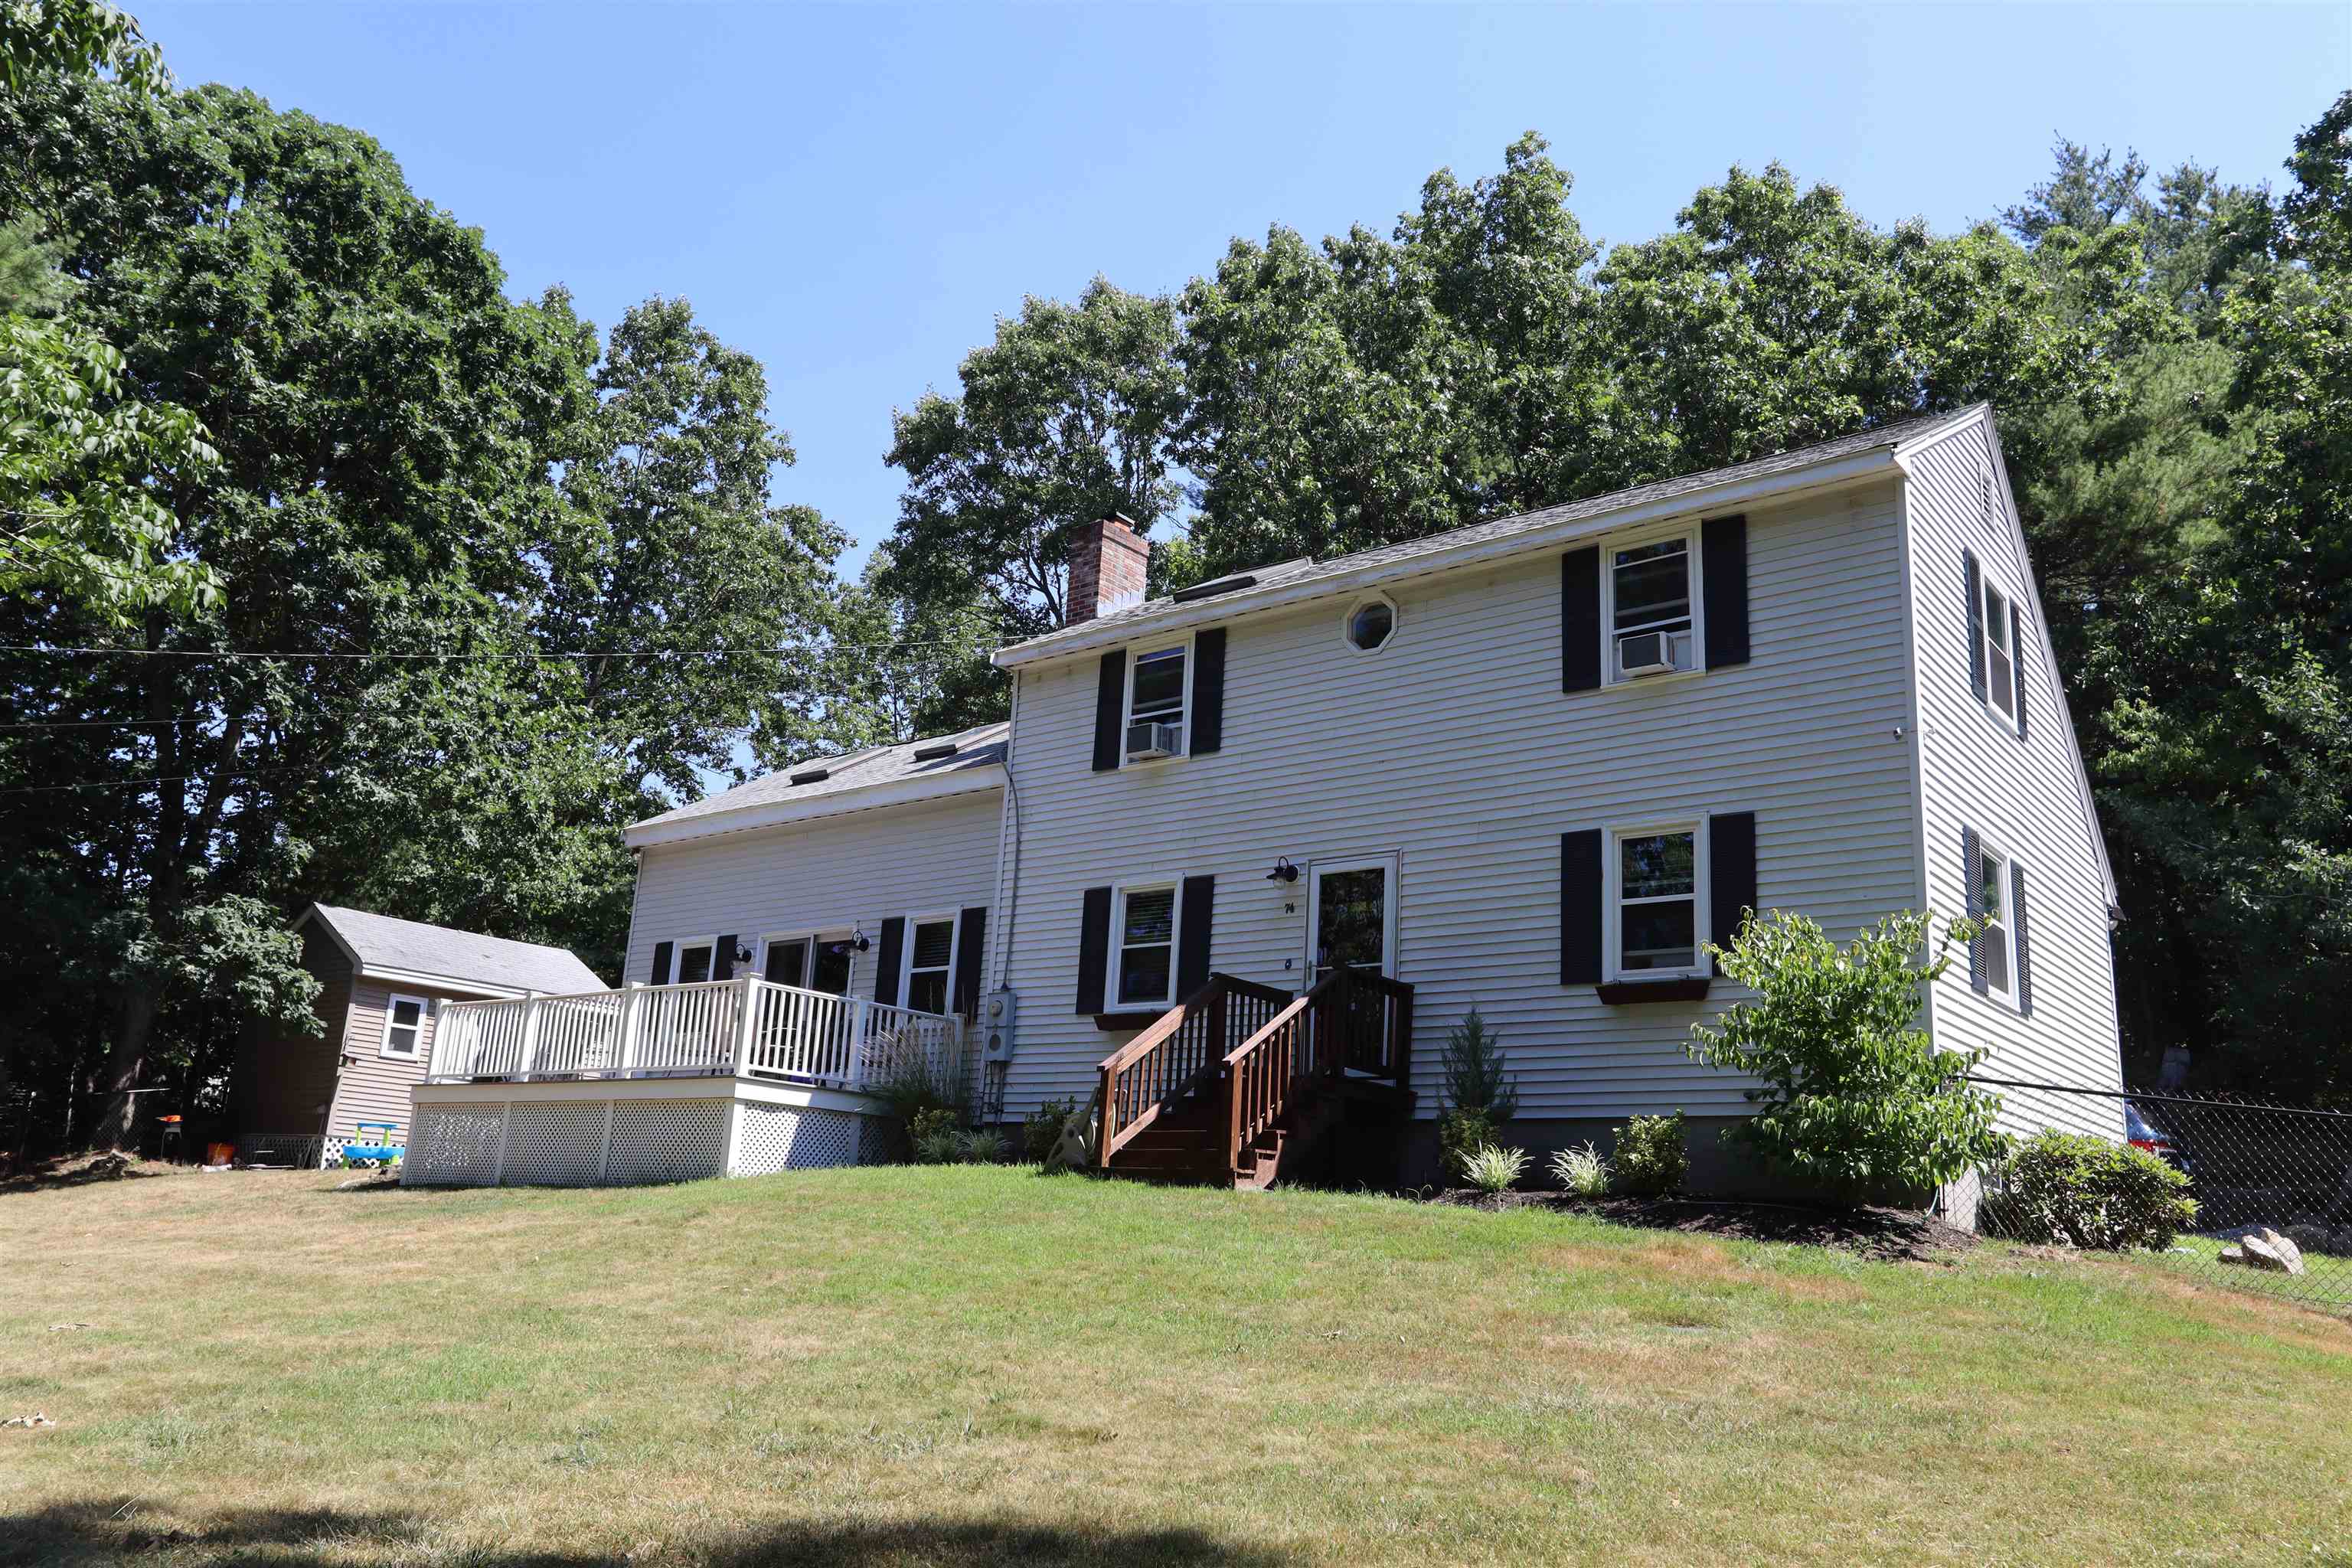 MLS 4923759: 74 Frost Road, Derry NH